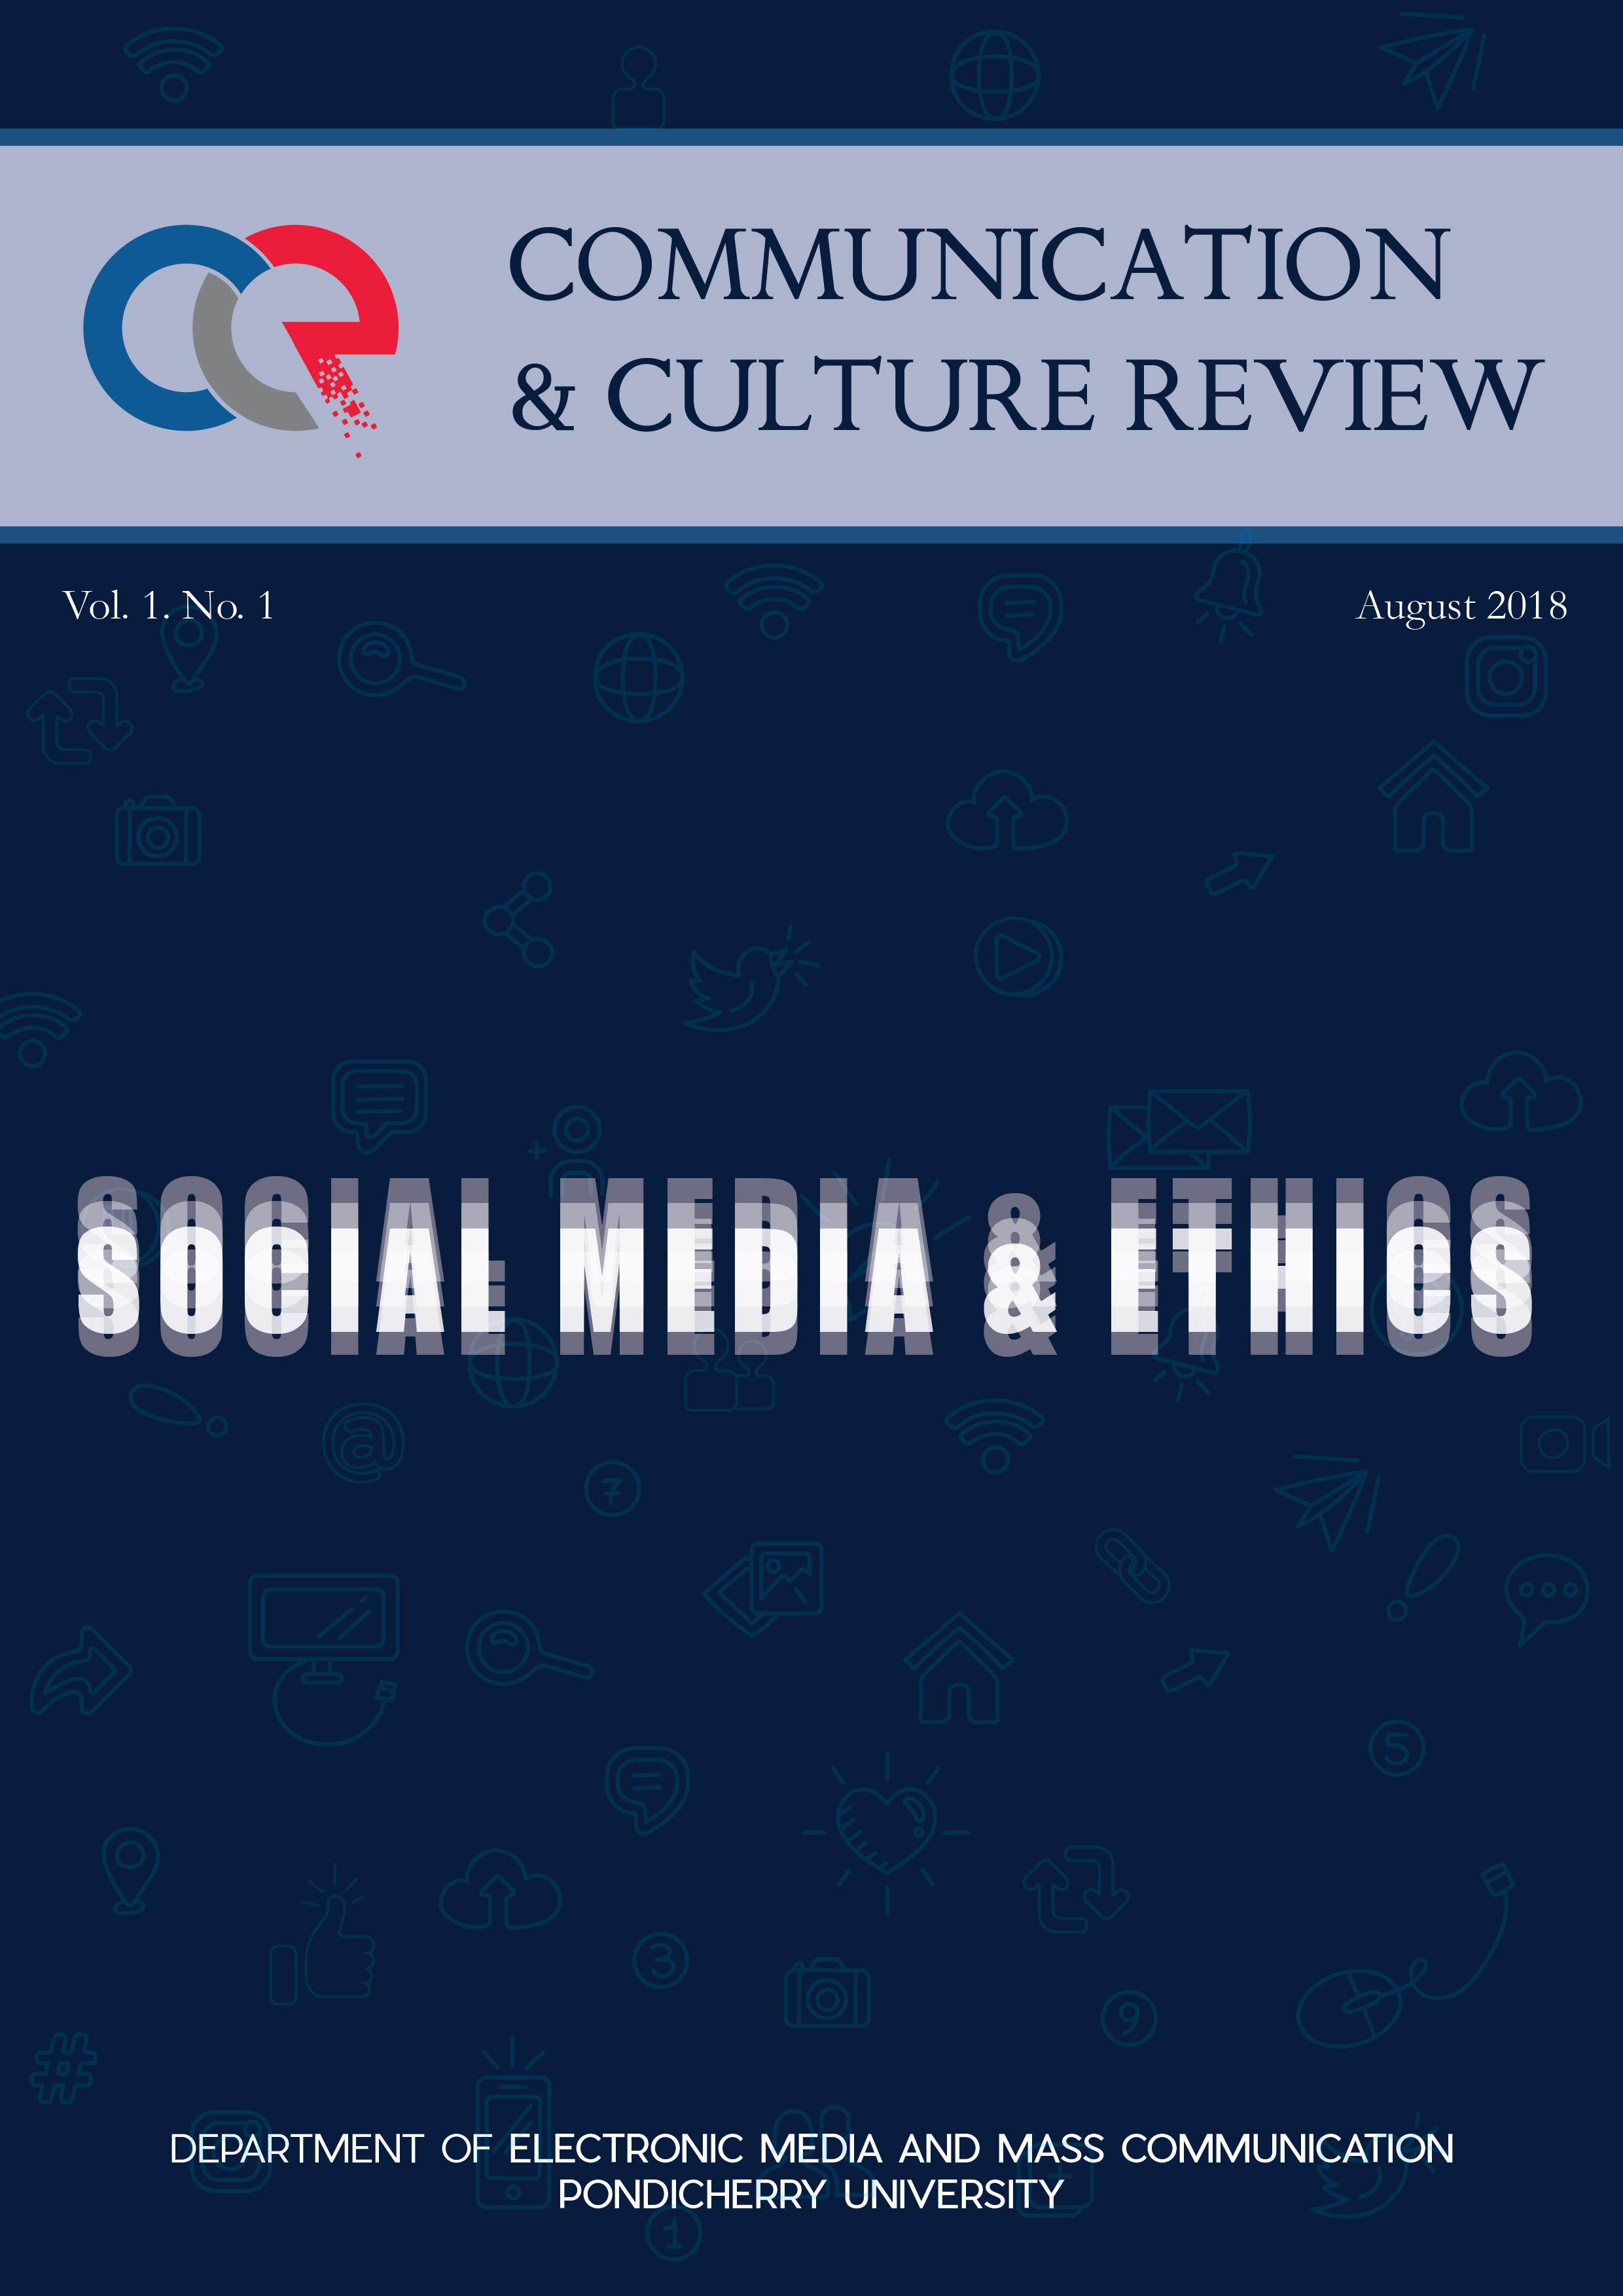 Inaugural Issue of Communication and Culture Review